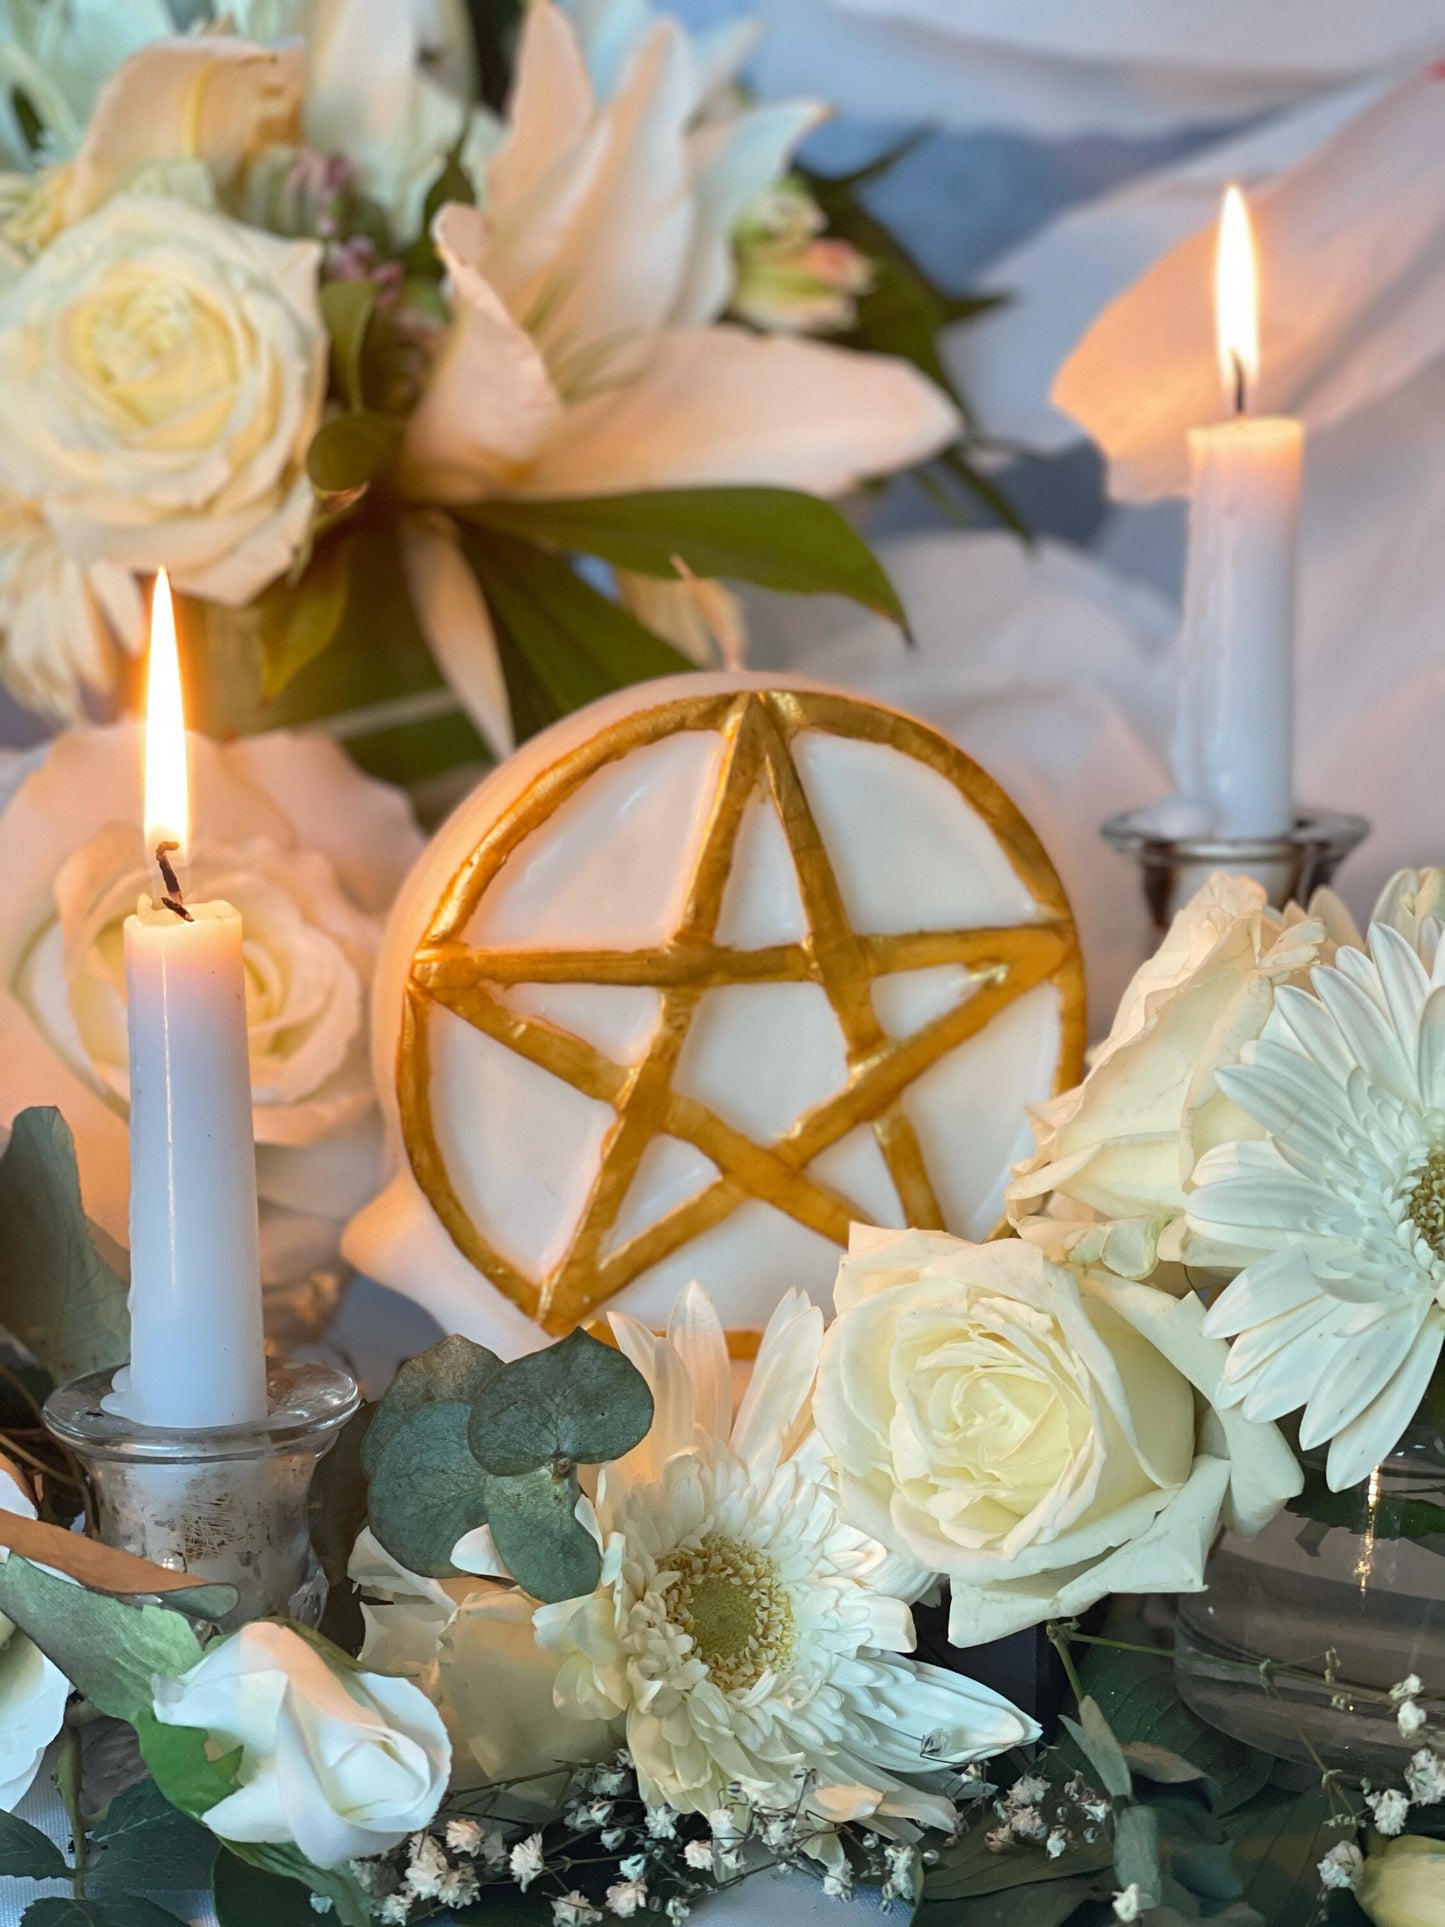 White Pentacle Candle